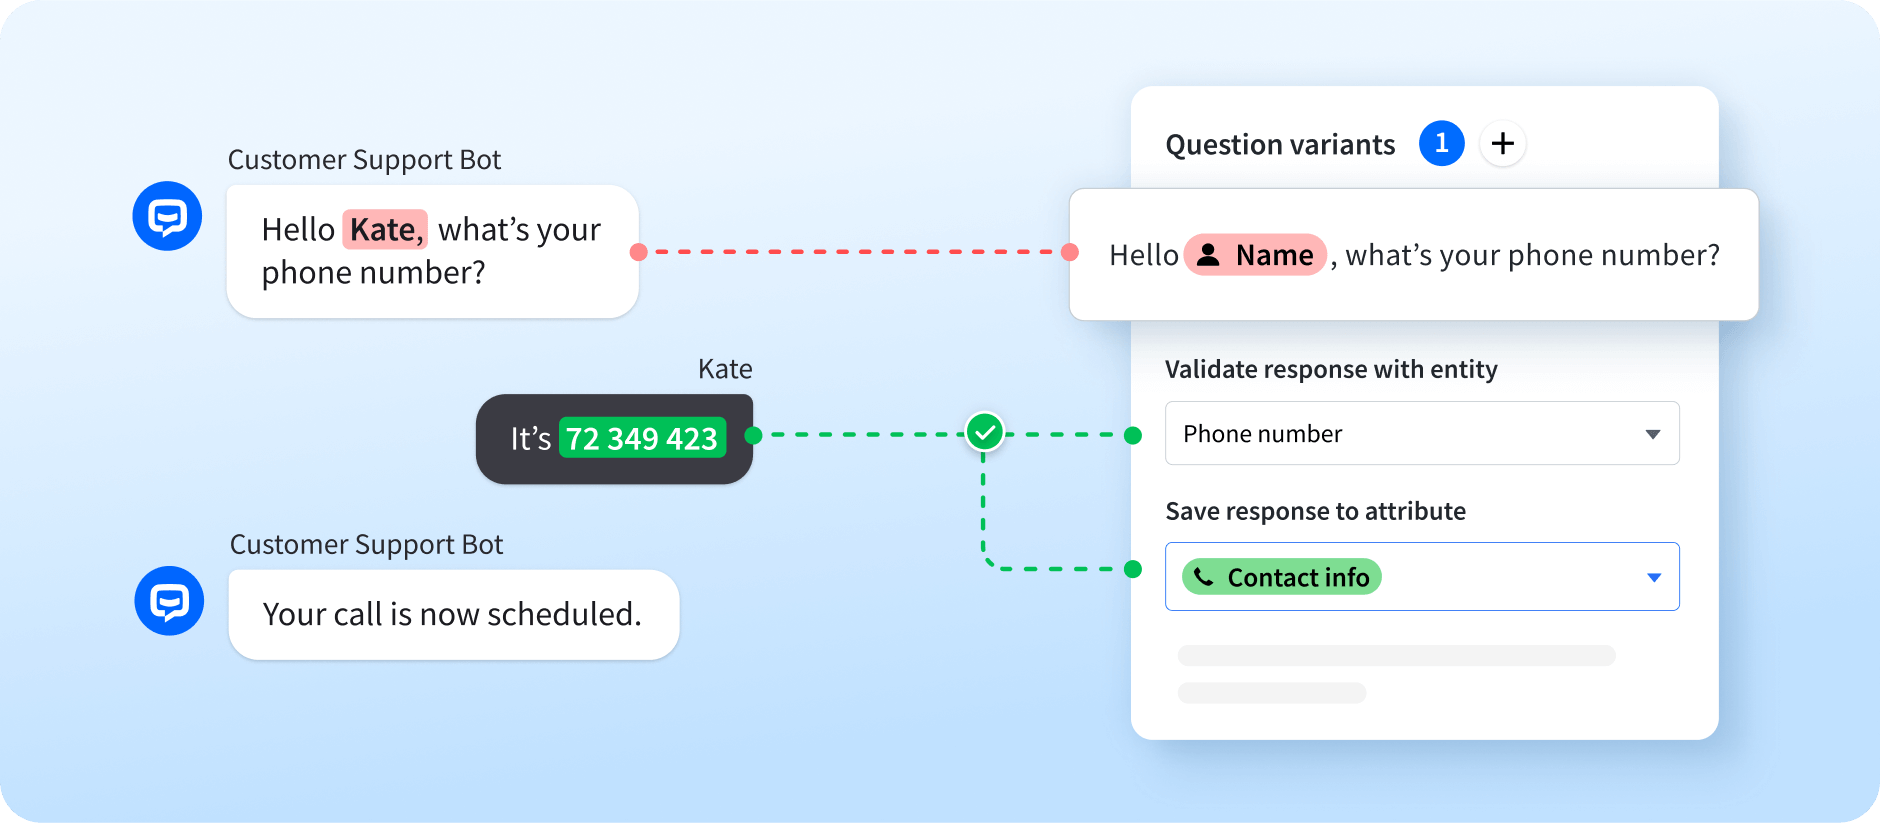 Data collection and personalization in the chatbot widget: name and phone number are collected during the chat.